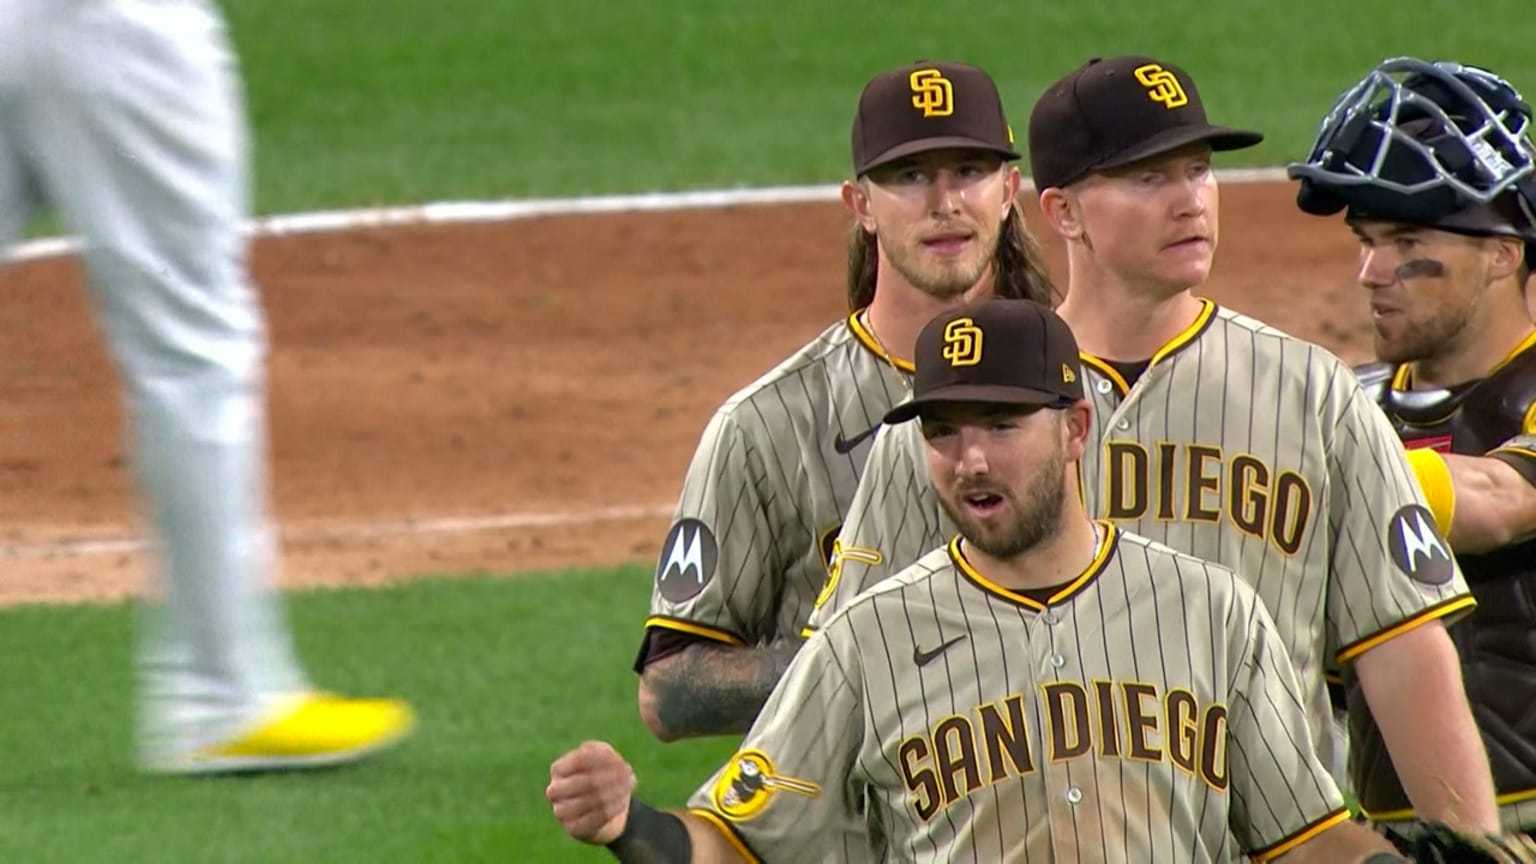 How do non-Padres fans feel about the Padres City Connect jerseys? : r/mlb